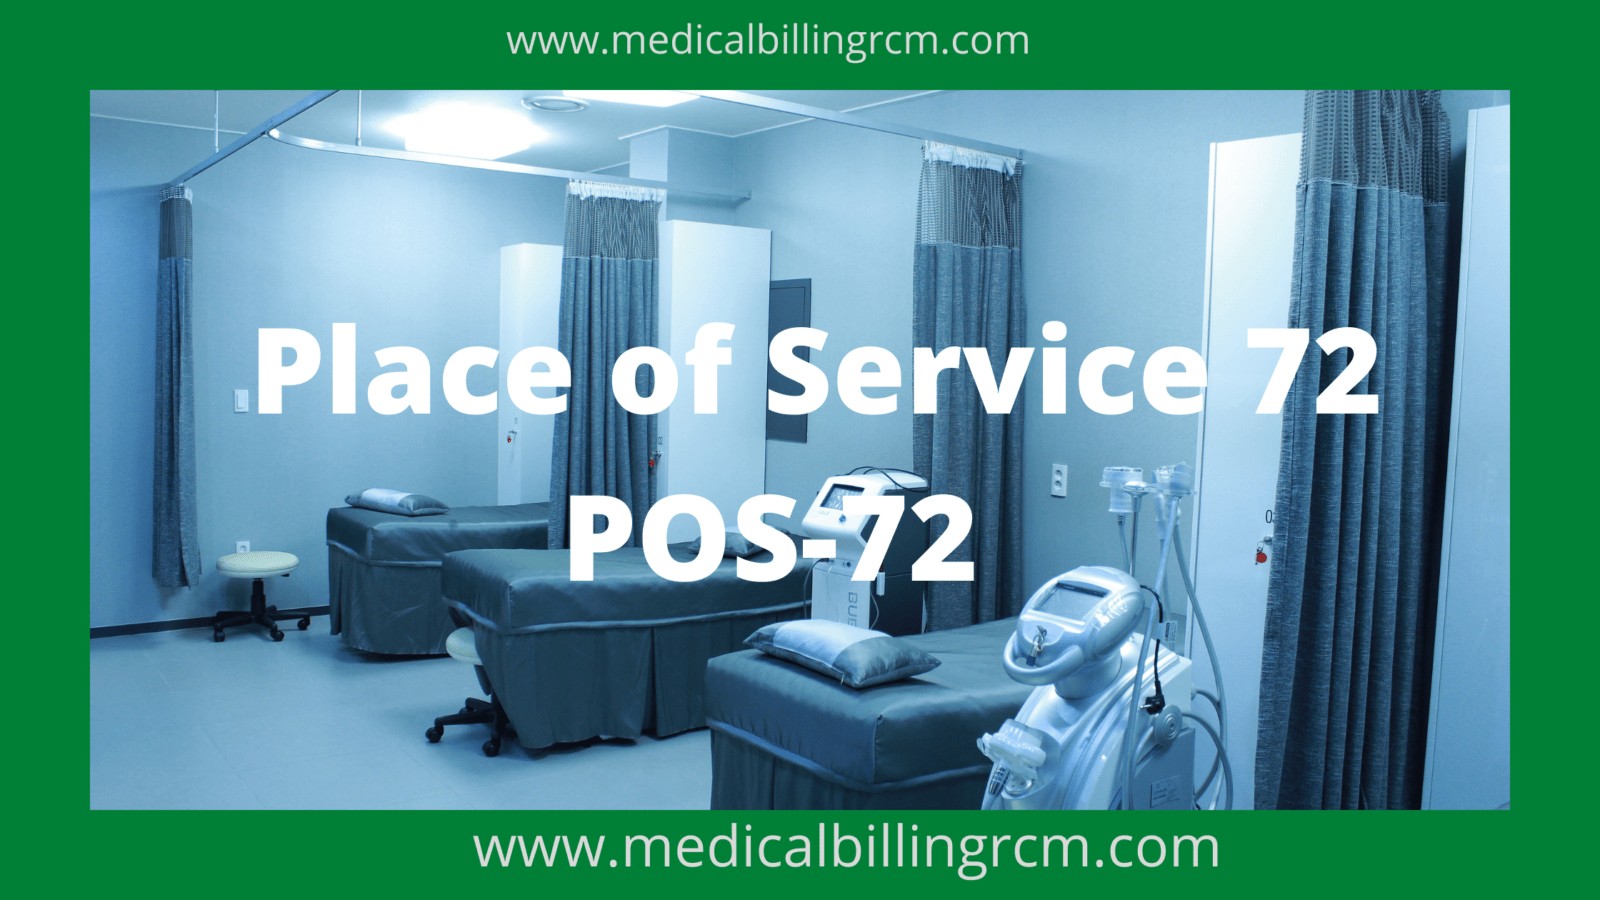 POS 72 in medical billing and coding definition